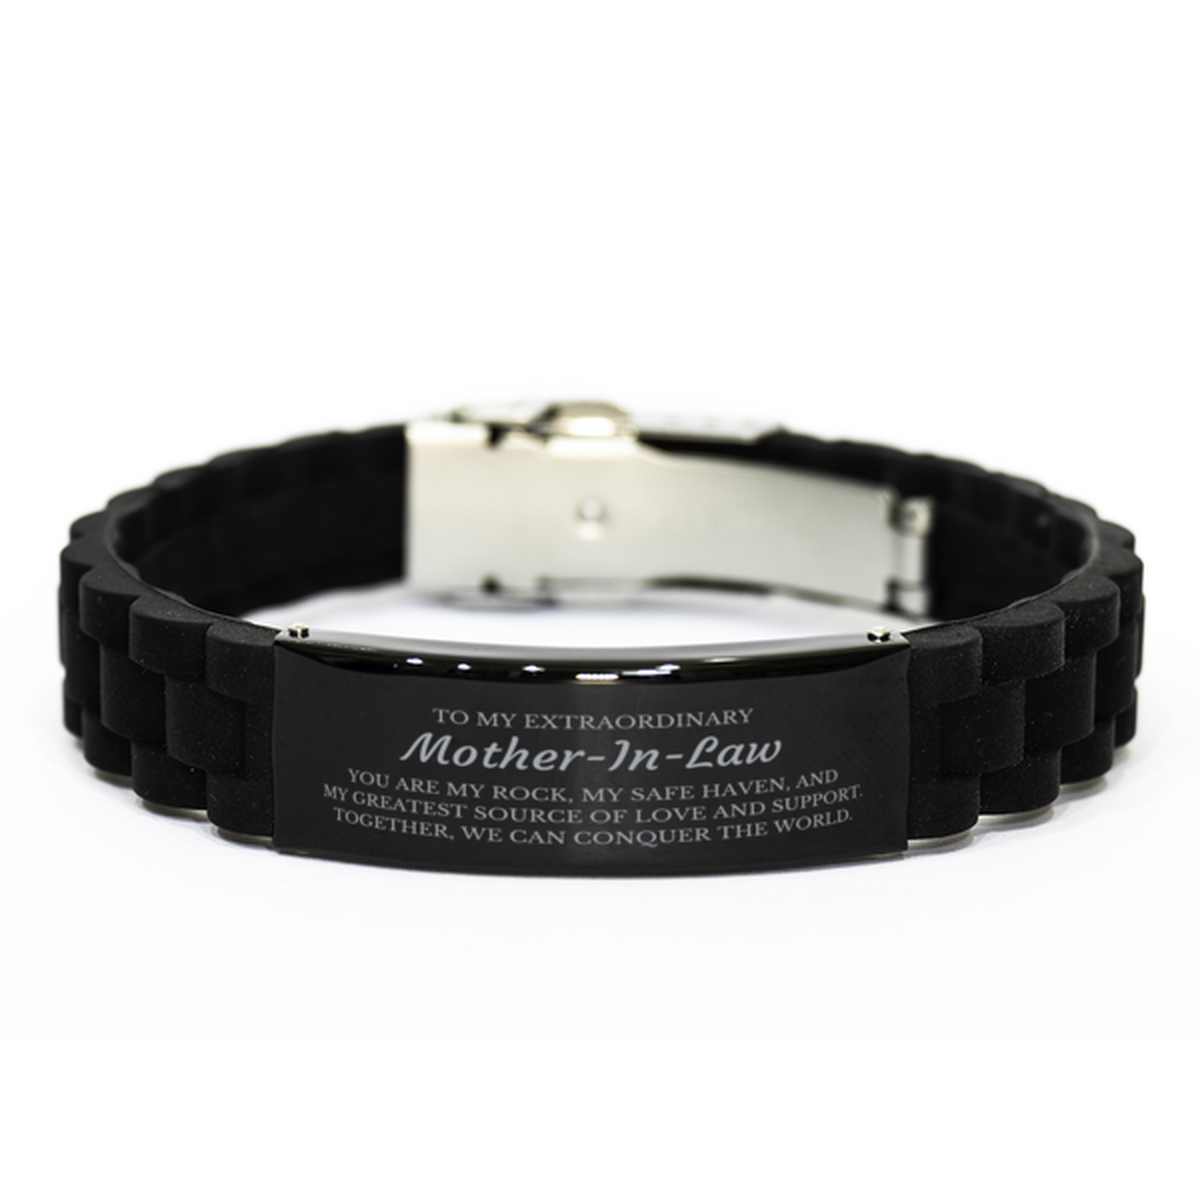 To My Extraordinary Mother-In-Law Gifts, Together, we can conquer the world, Birthday Black Glidelock Clasp Bracelet For Mother-In-Law, Christmas Gifts For Mother-In-Law